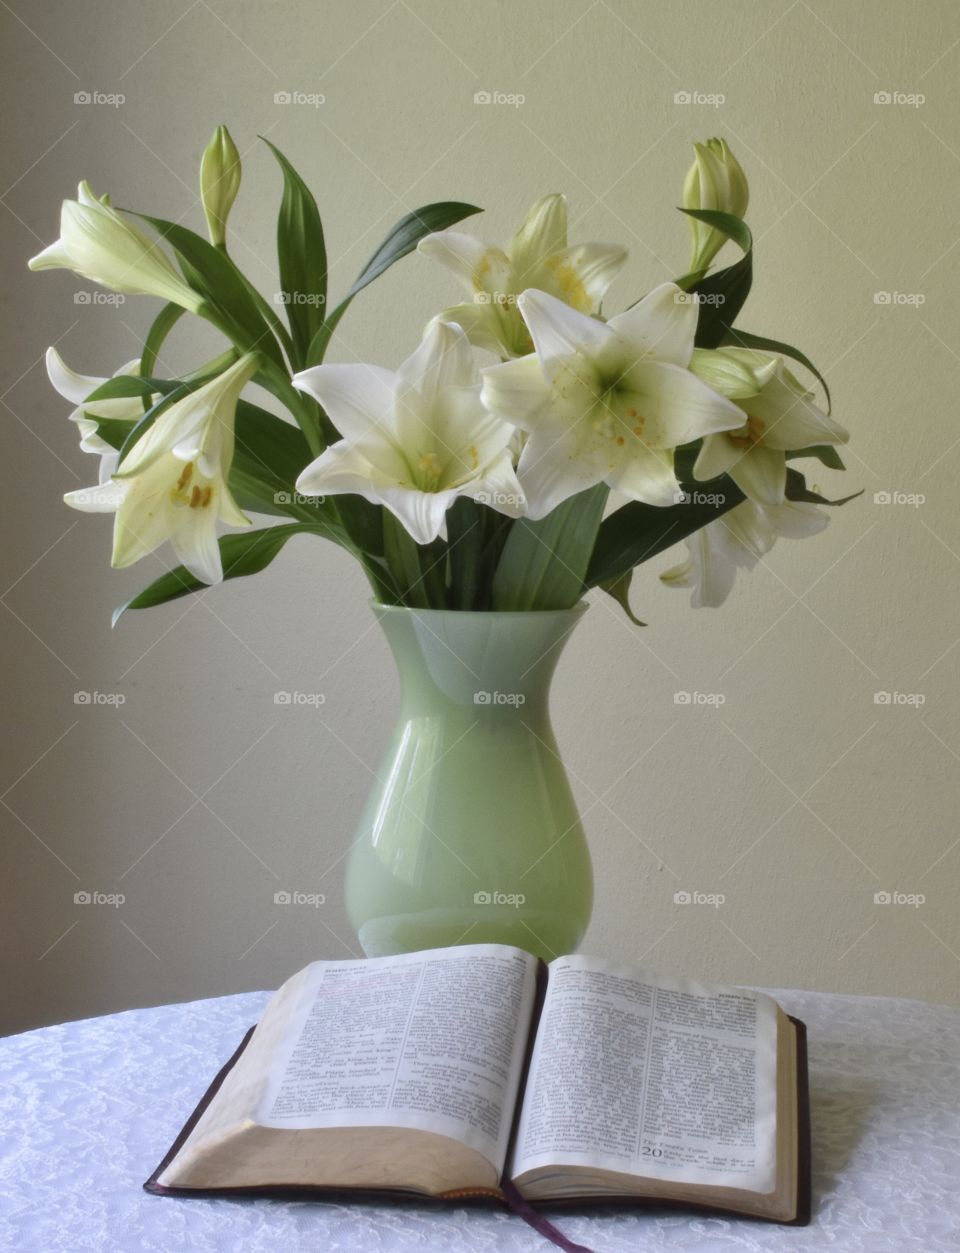 Easter, vase of lilies with a Bible by it